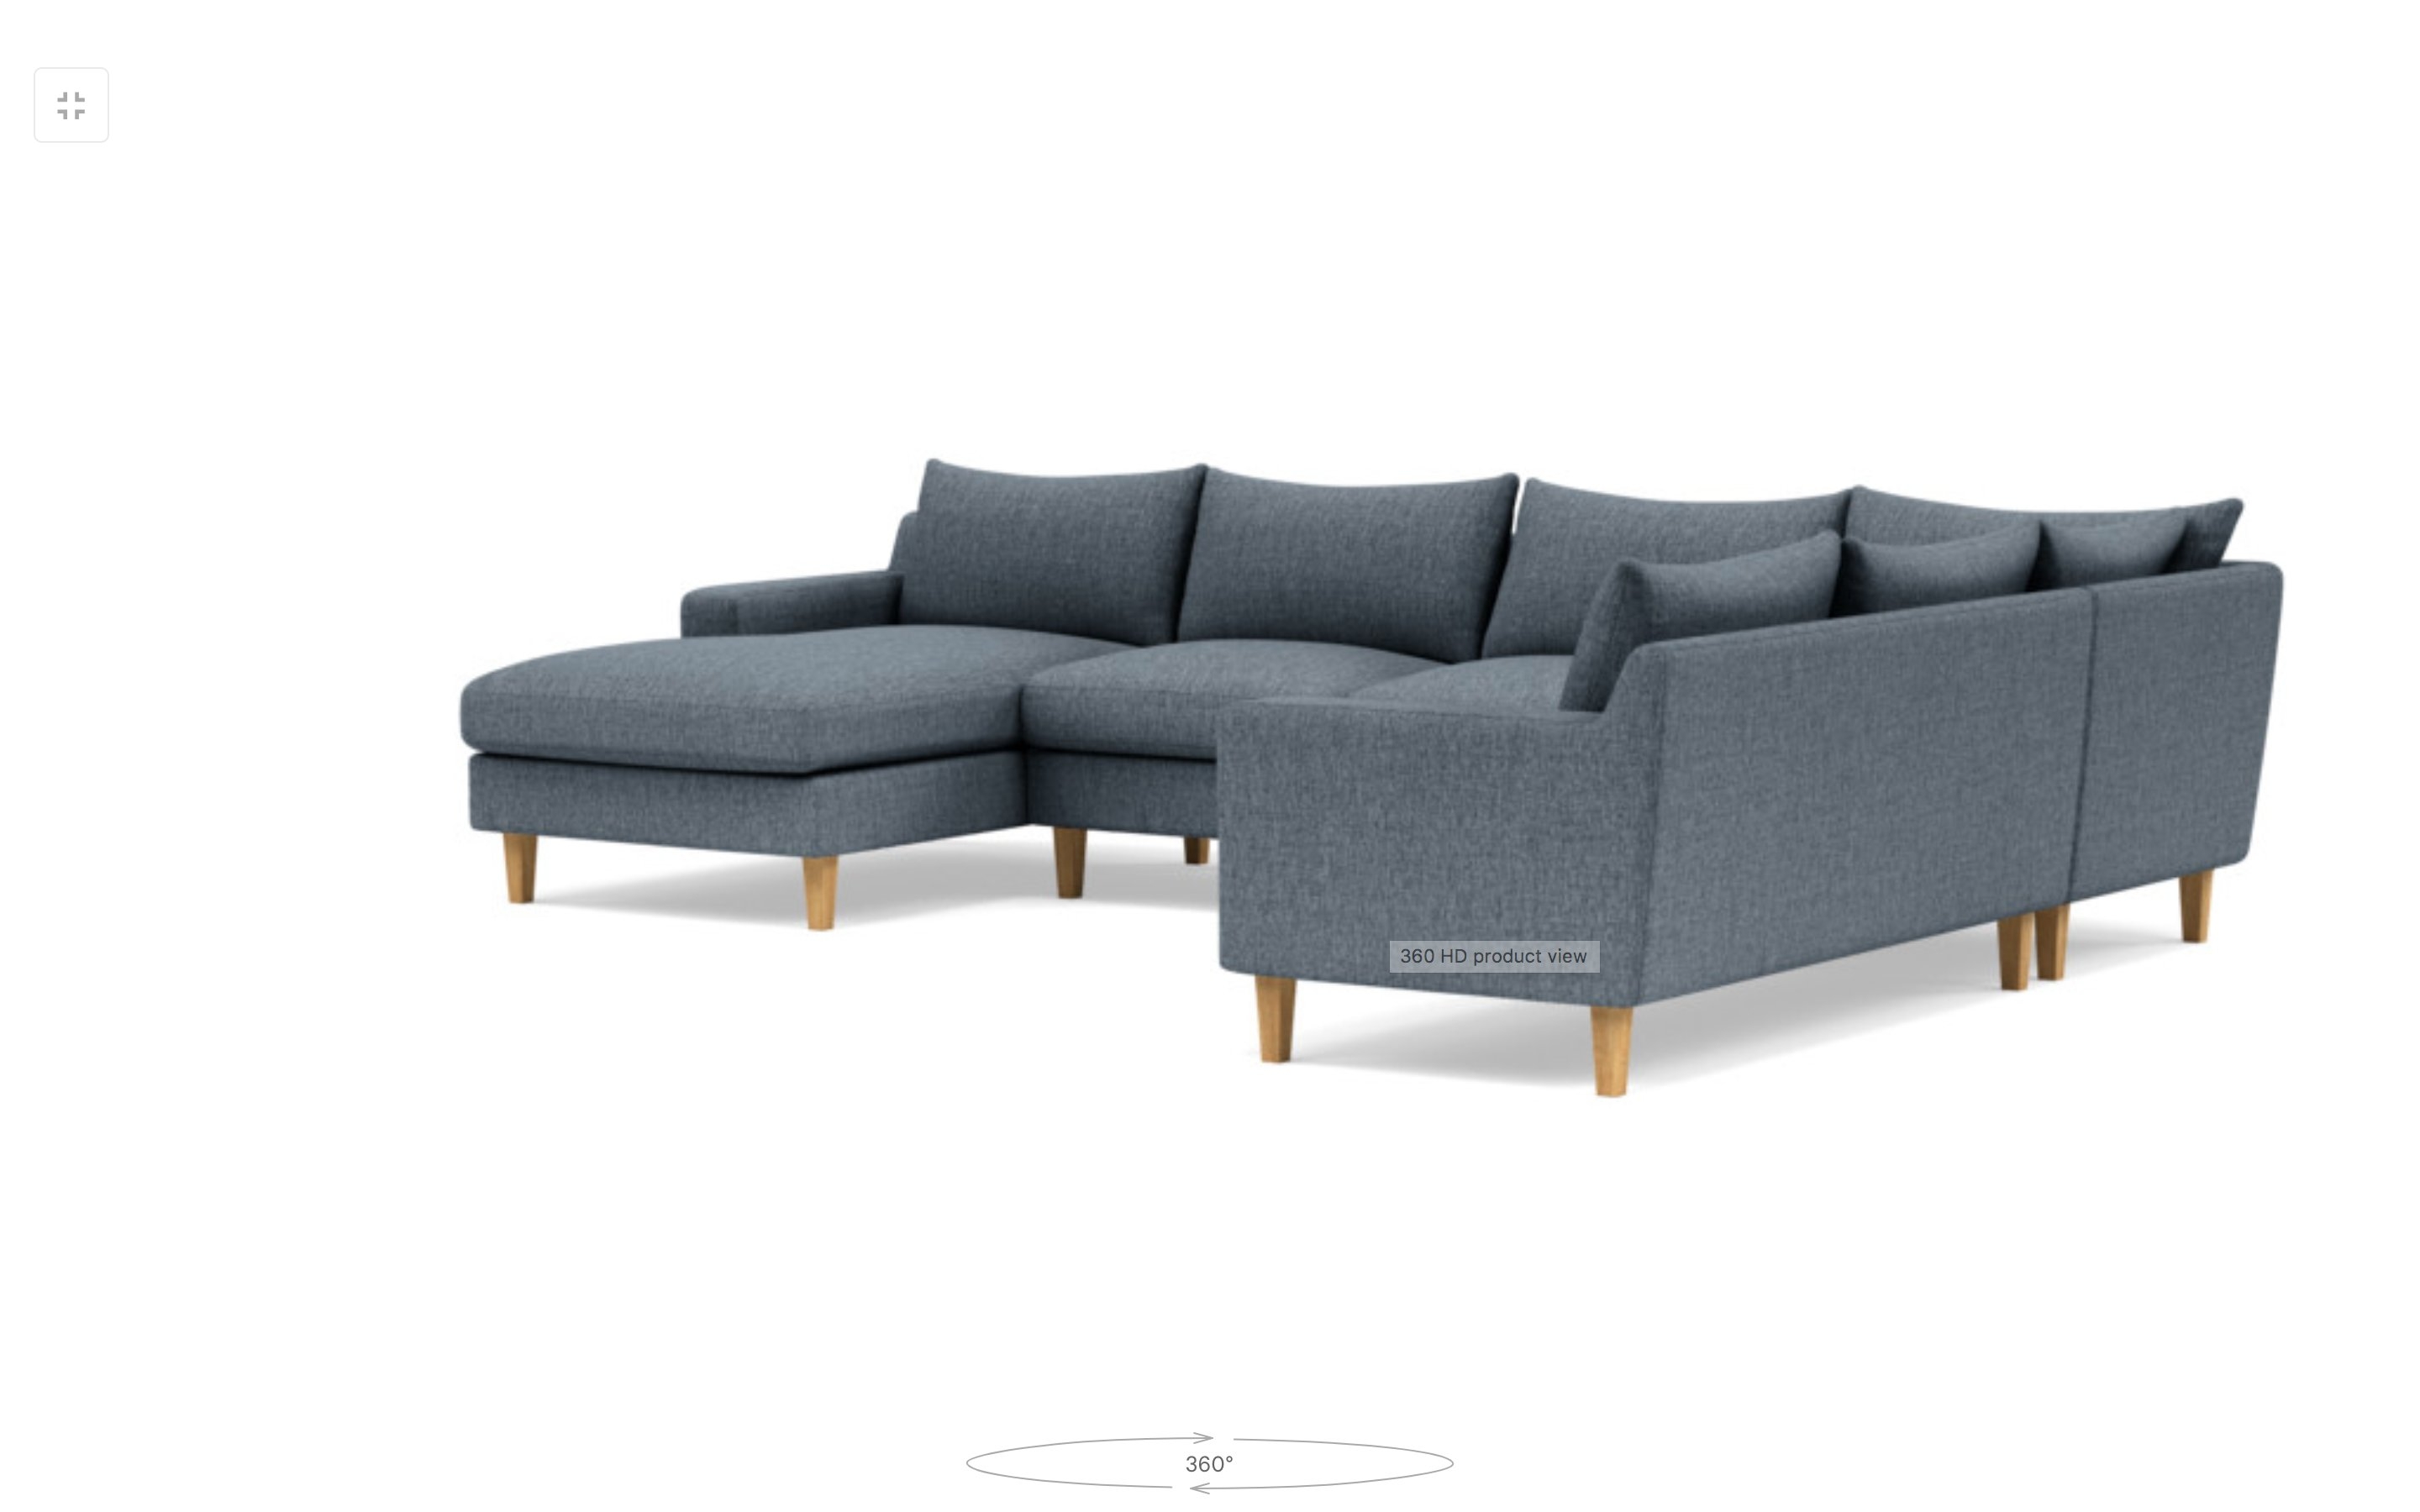 Sloan 4-Piece Corner Sectional Sofa with Left Chaise - Image 3